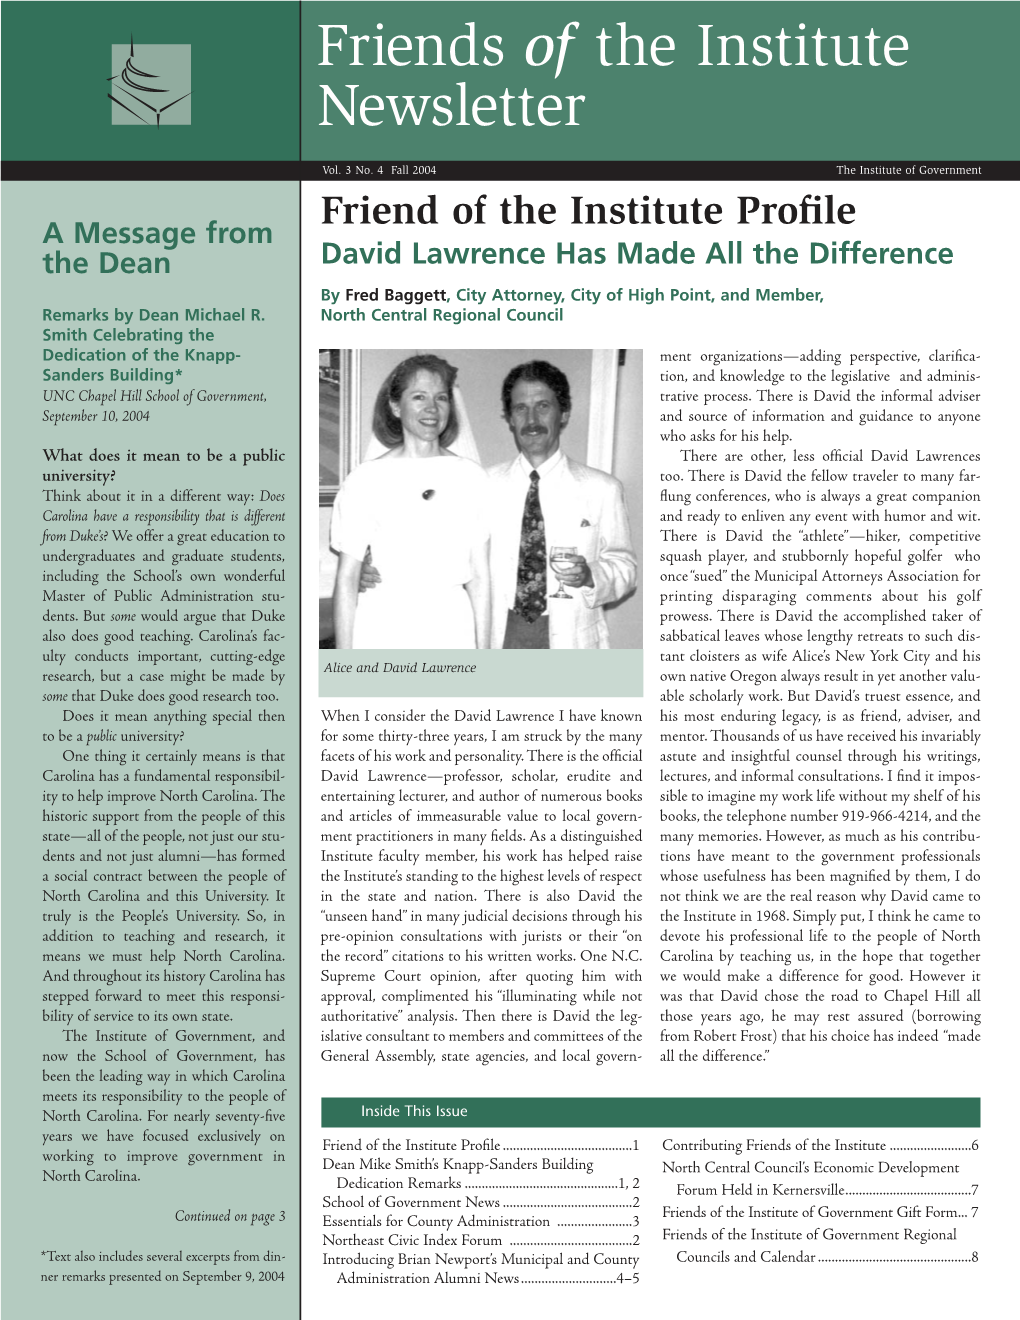 Friends of the Institute Newsletter